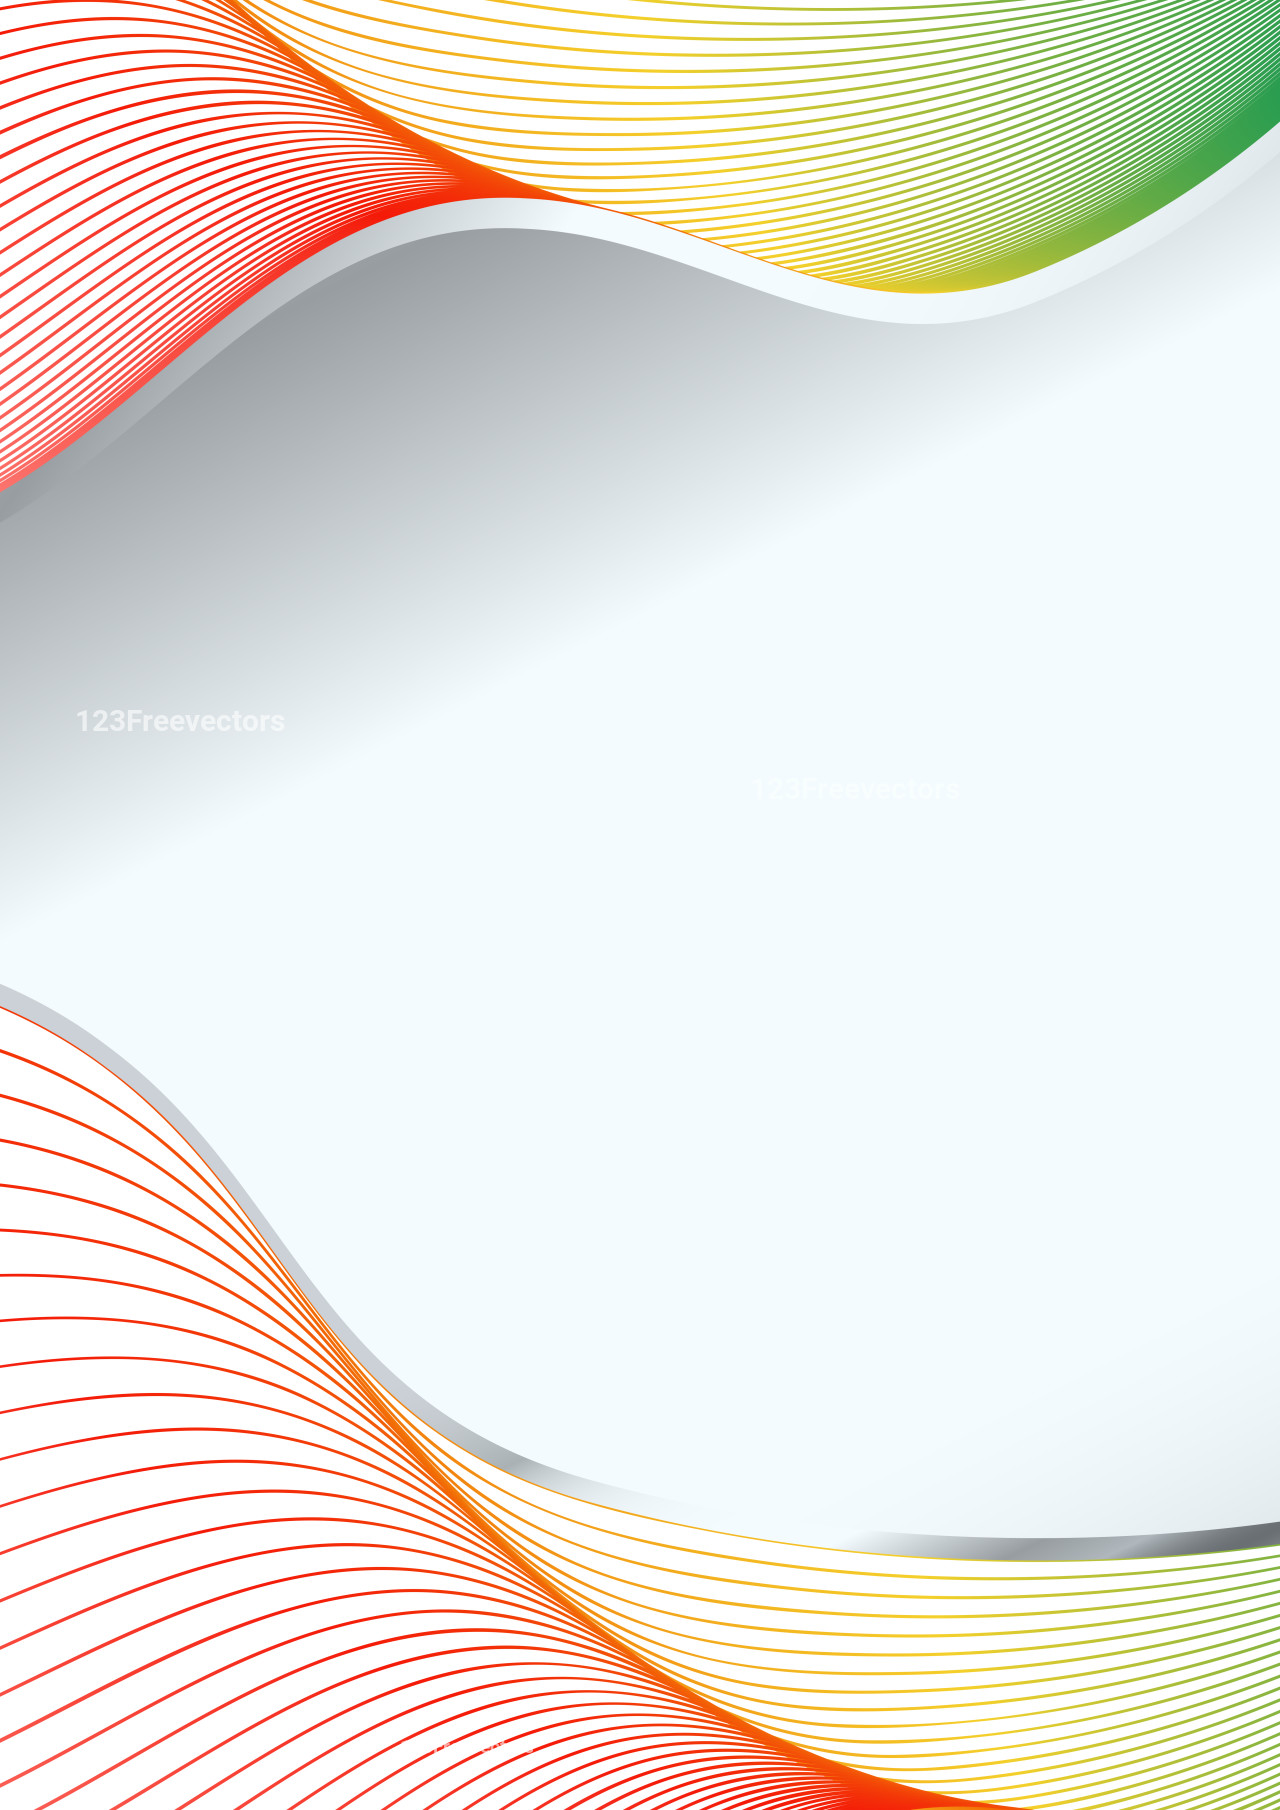 Red Green and Beige Flow Curves Background Template with Space for Your ...